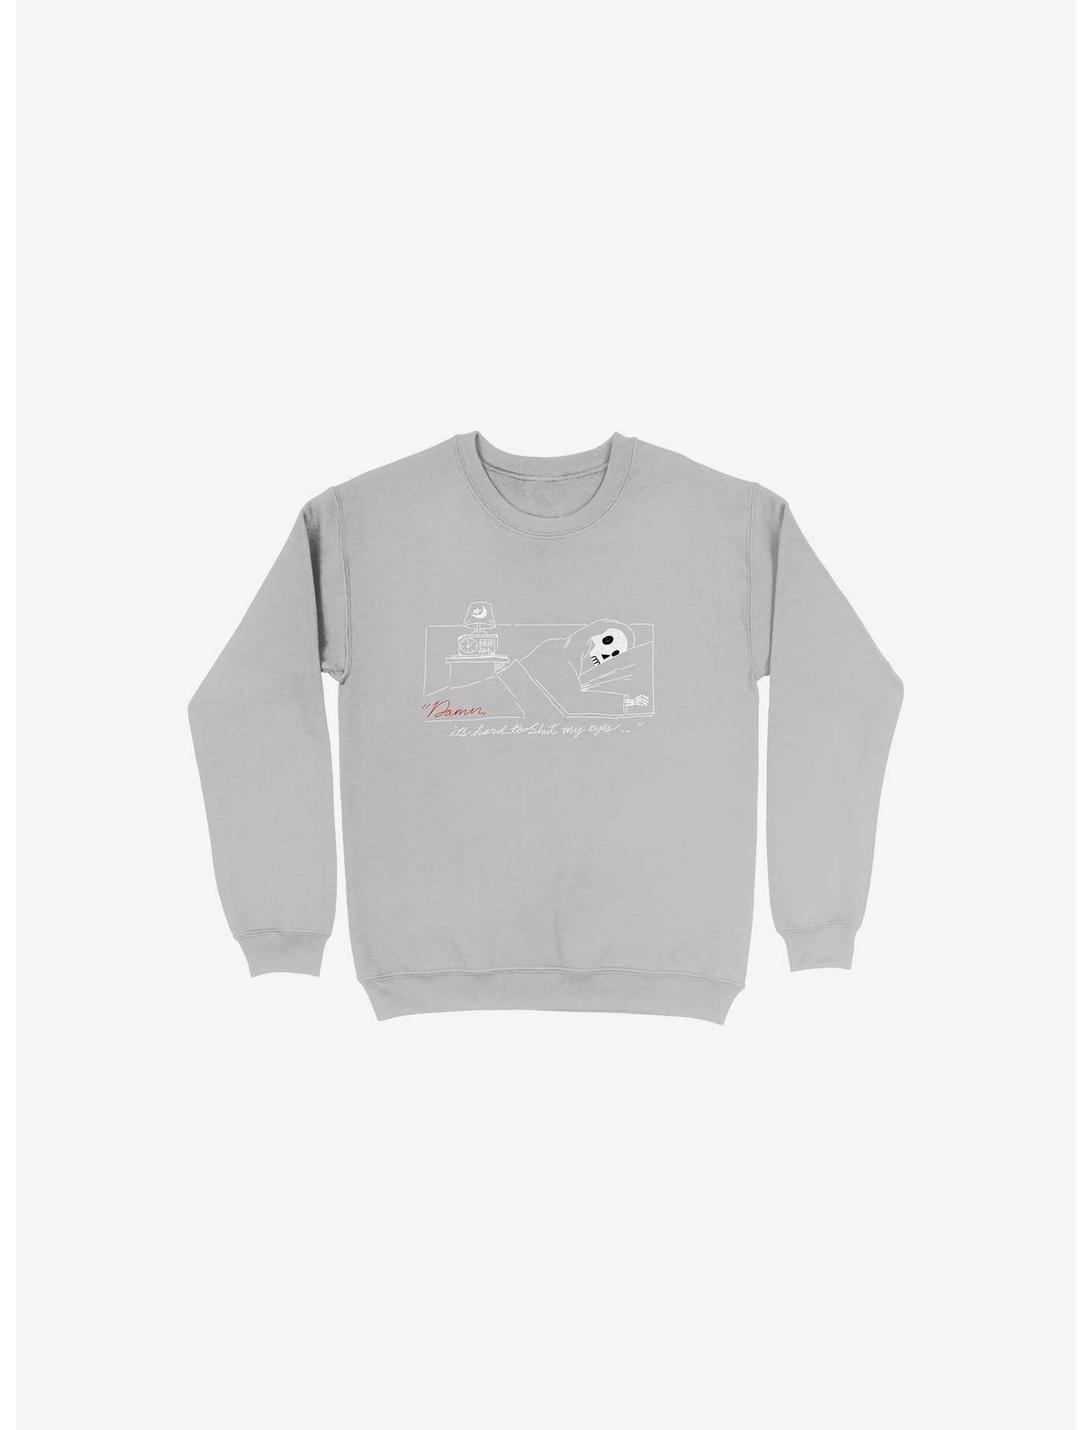 Damn, Sleepy Time Is Out Sweatshirt, SILVER, hi-res